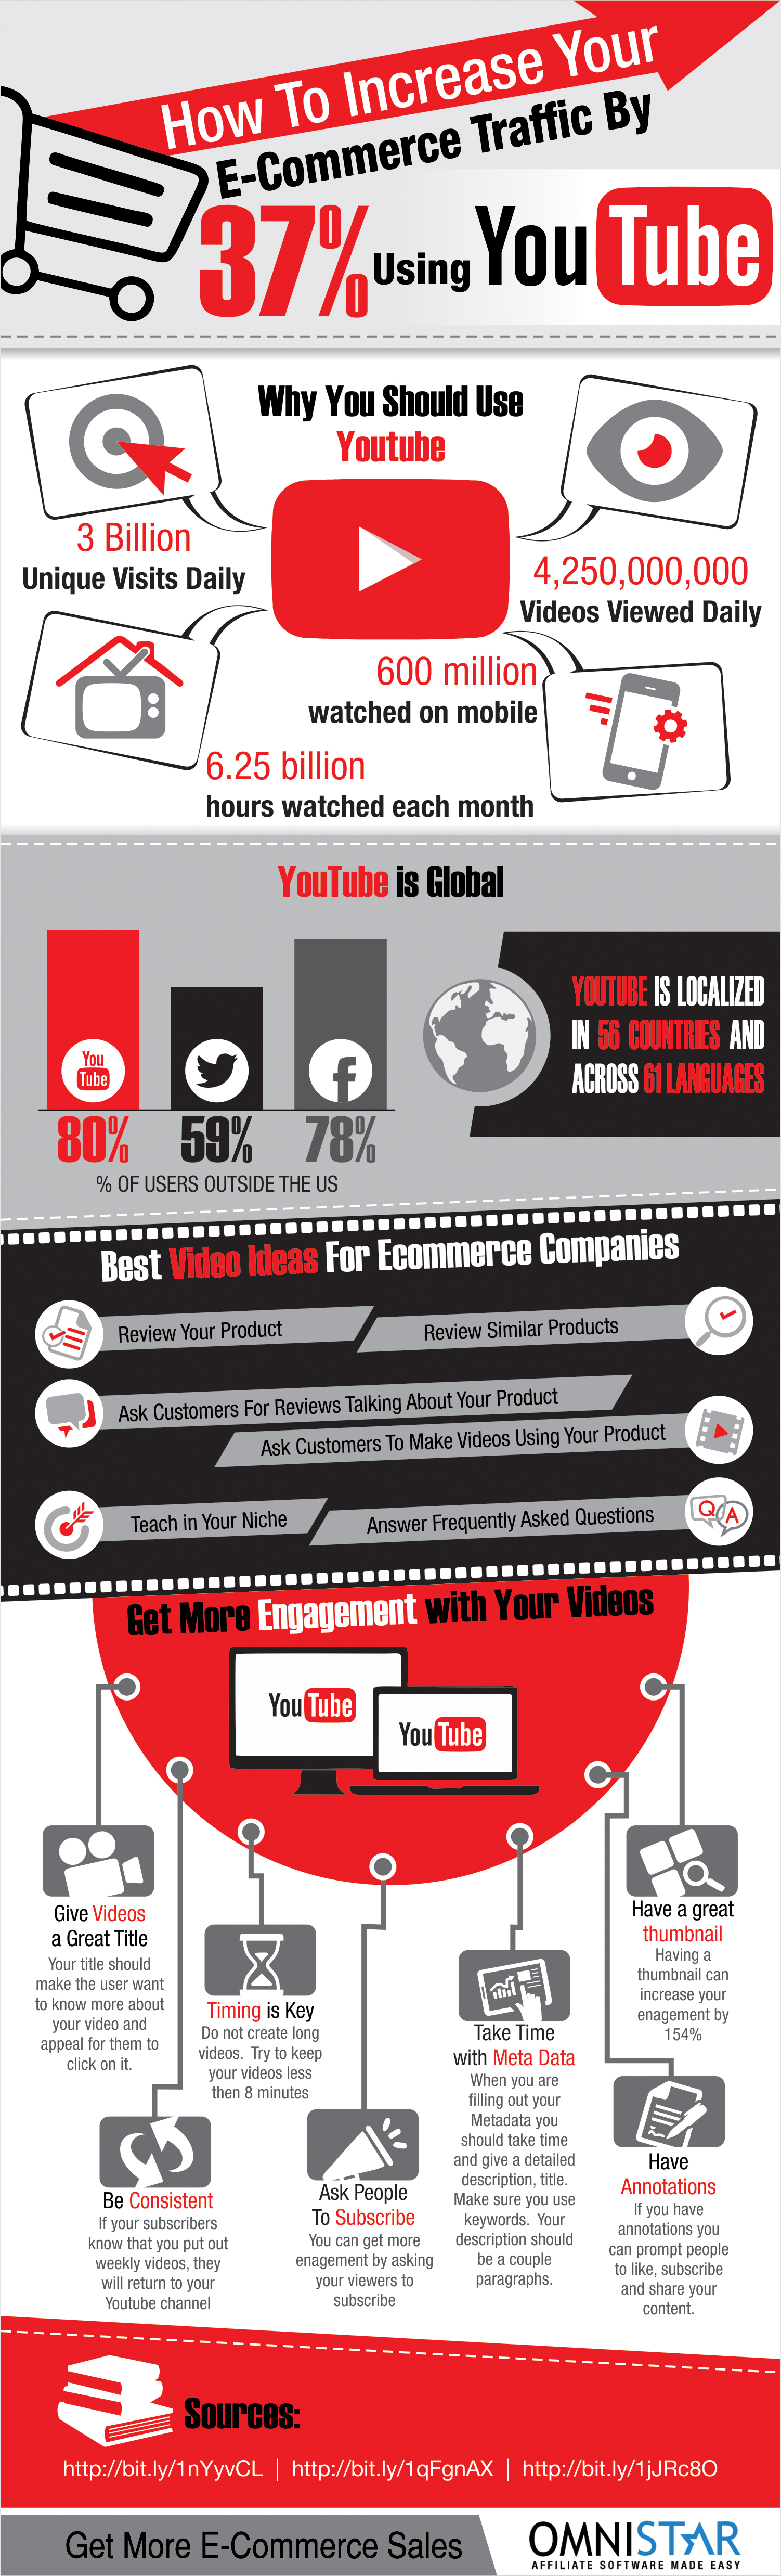 How to Increase Your eCommerce Traffic by 37% Using YouTube